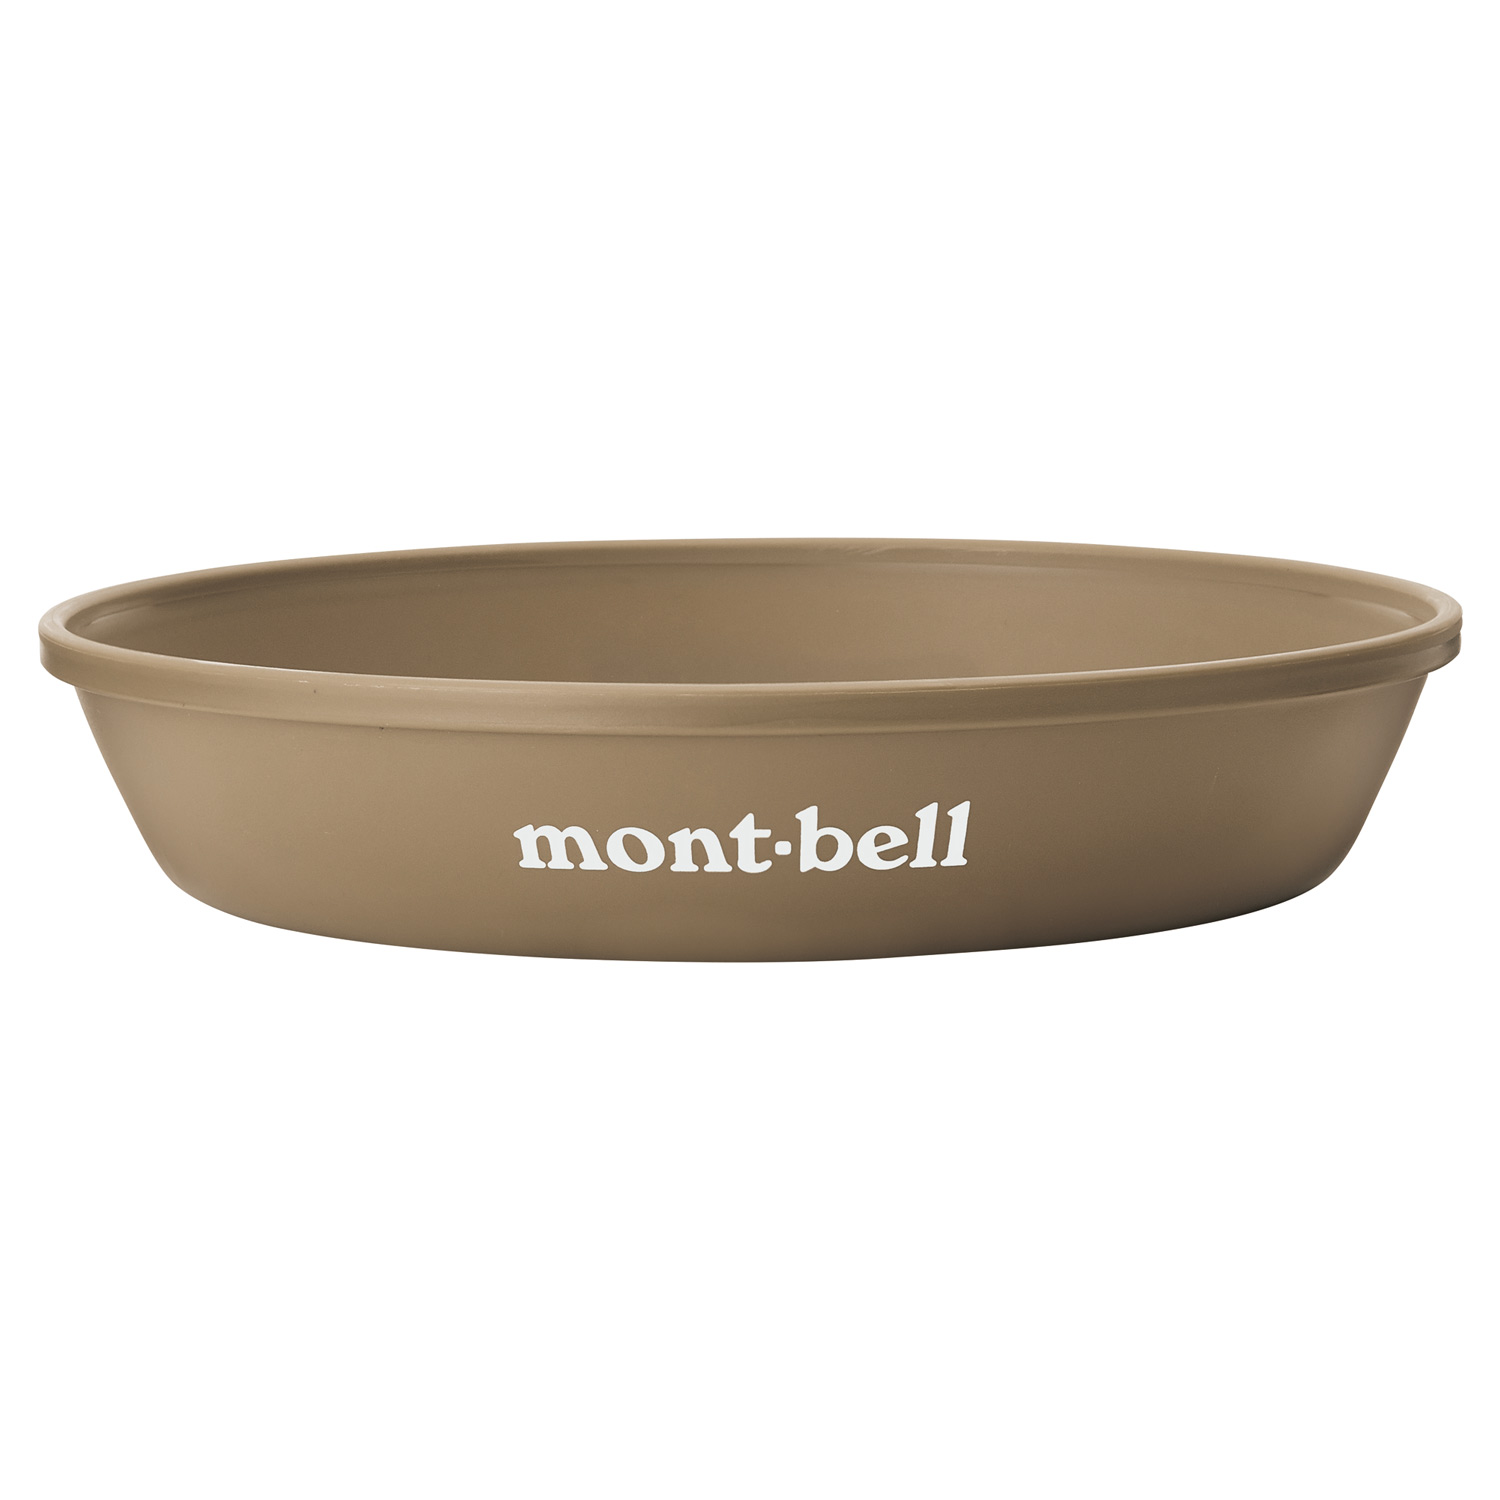 https://www.montbell.us/products/prod_img/zoom/z_1124557_bnov.jpg